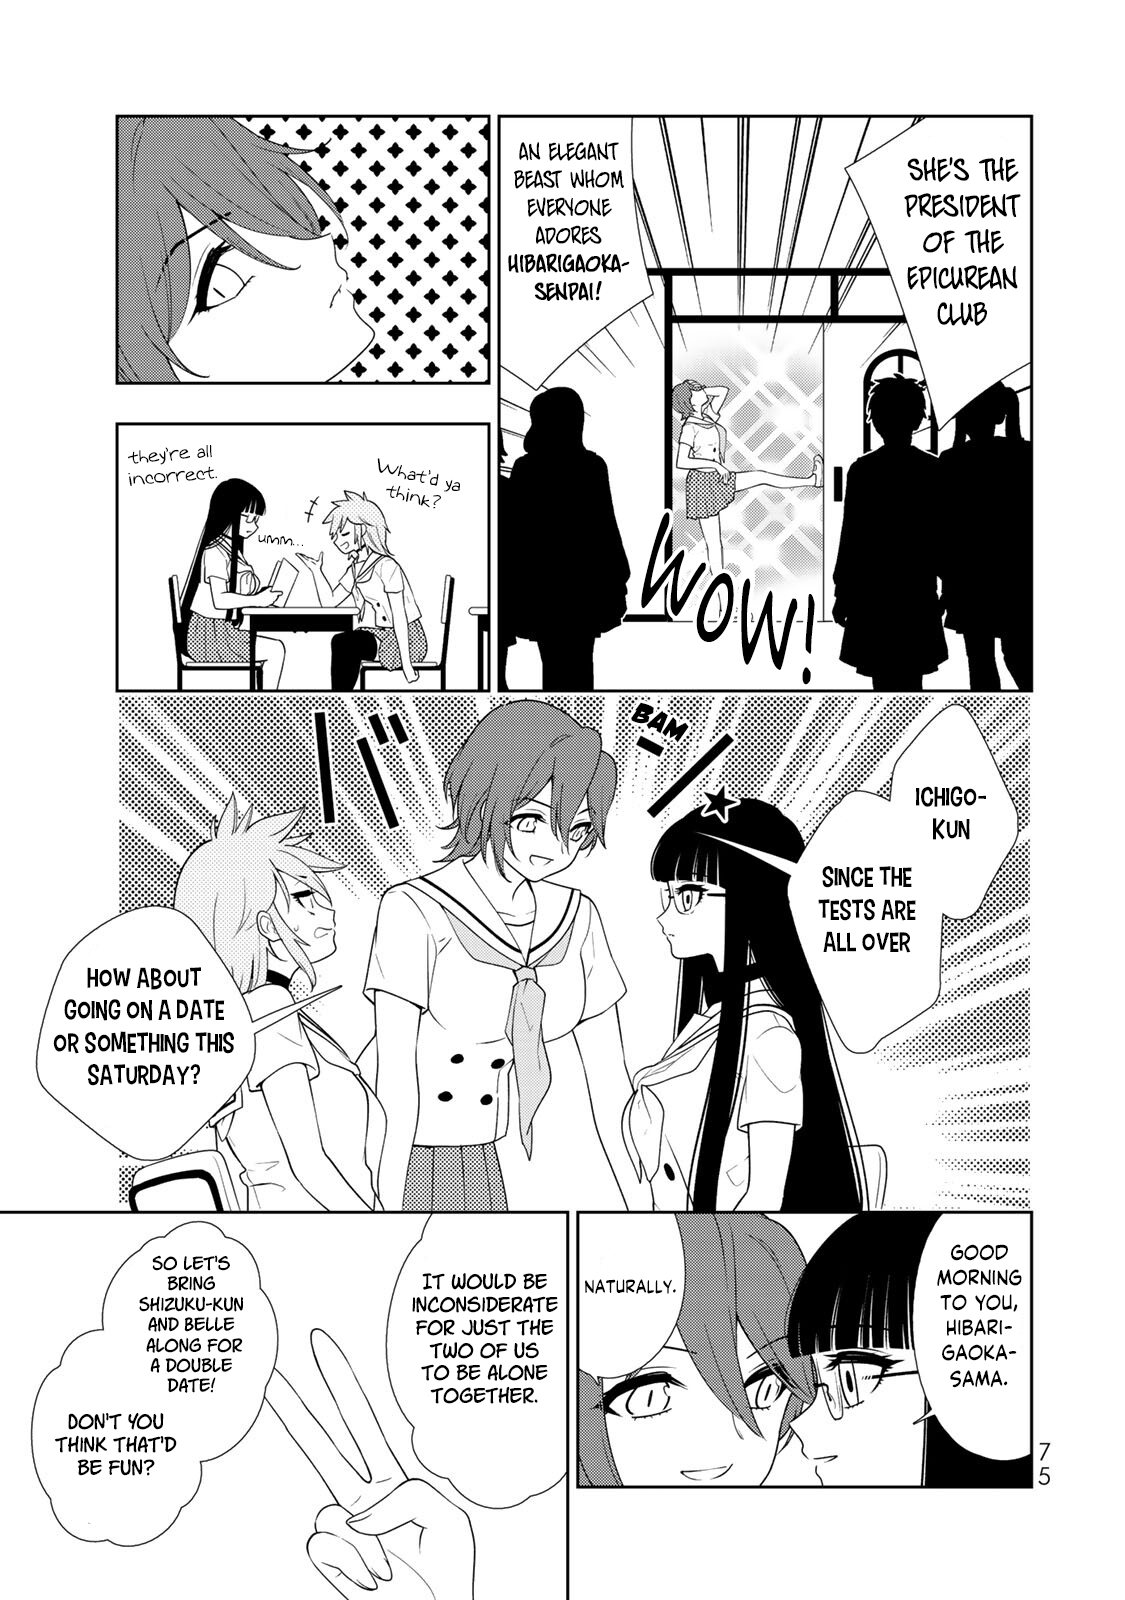 Kamitsuki Gakuen Vol.2 Chapter 8: Spicy★Watch Out For The Double Date!! - Picture 3